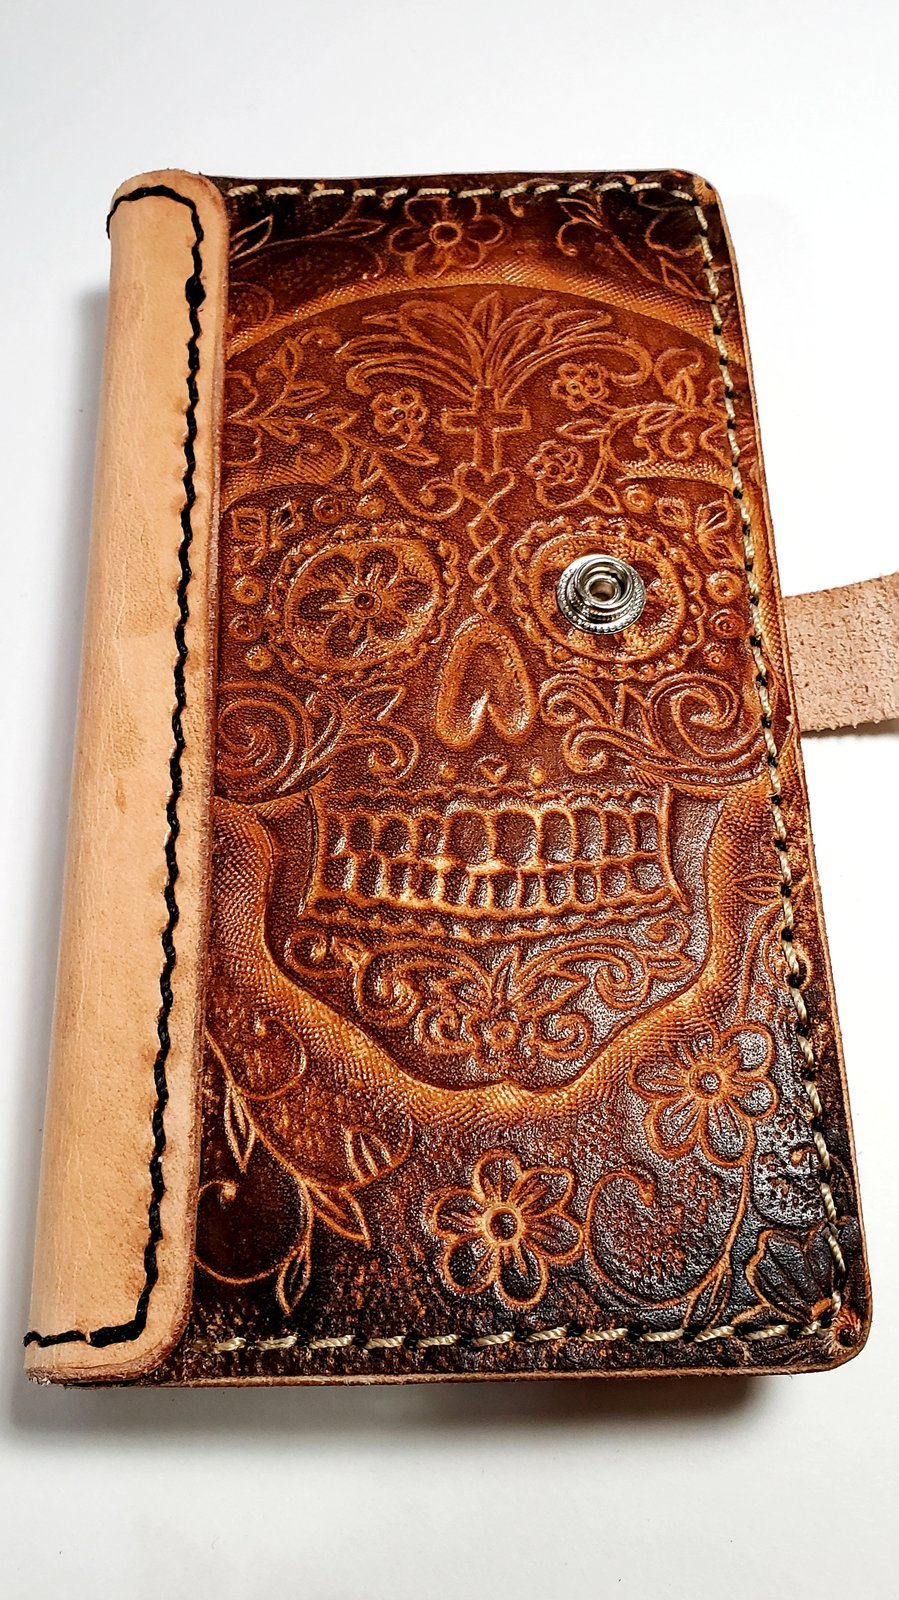 Custom Hand Tooled Leather Smartphone smart phone case. Made to